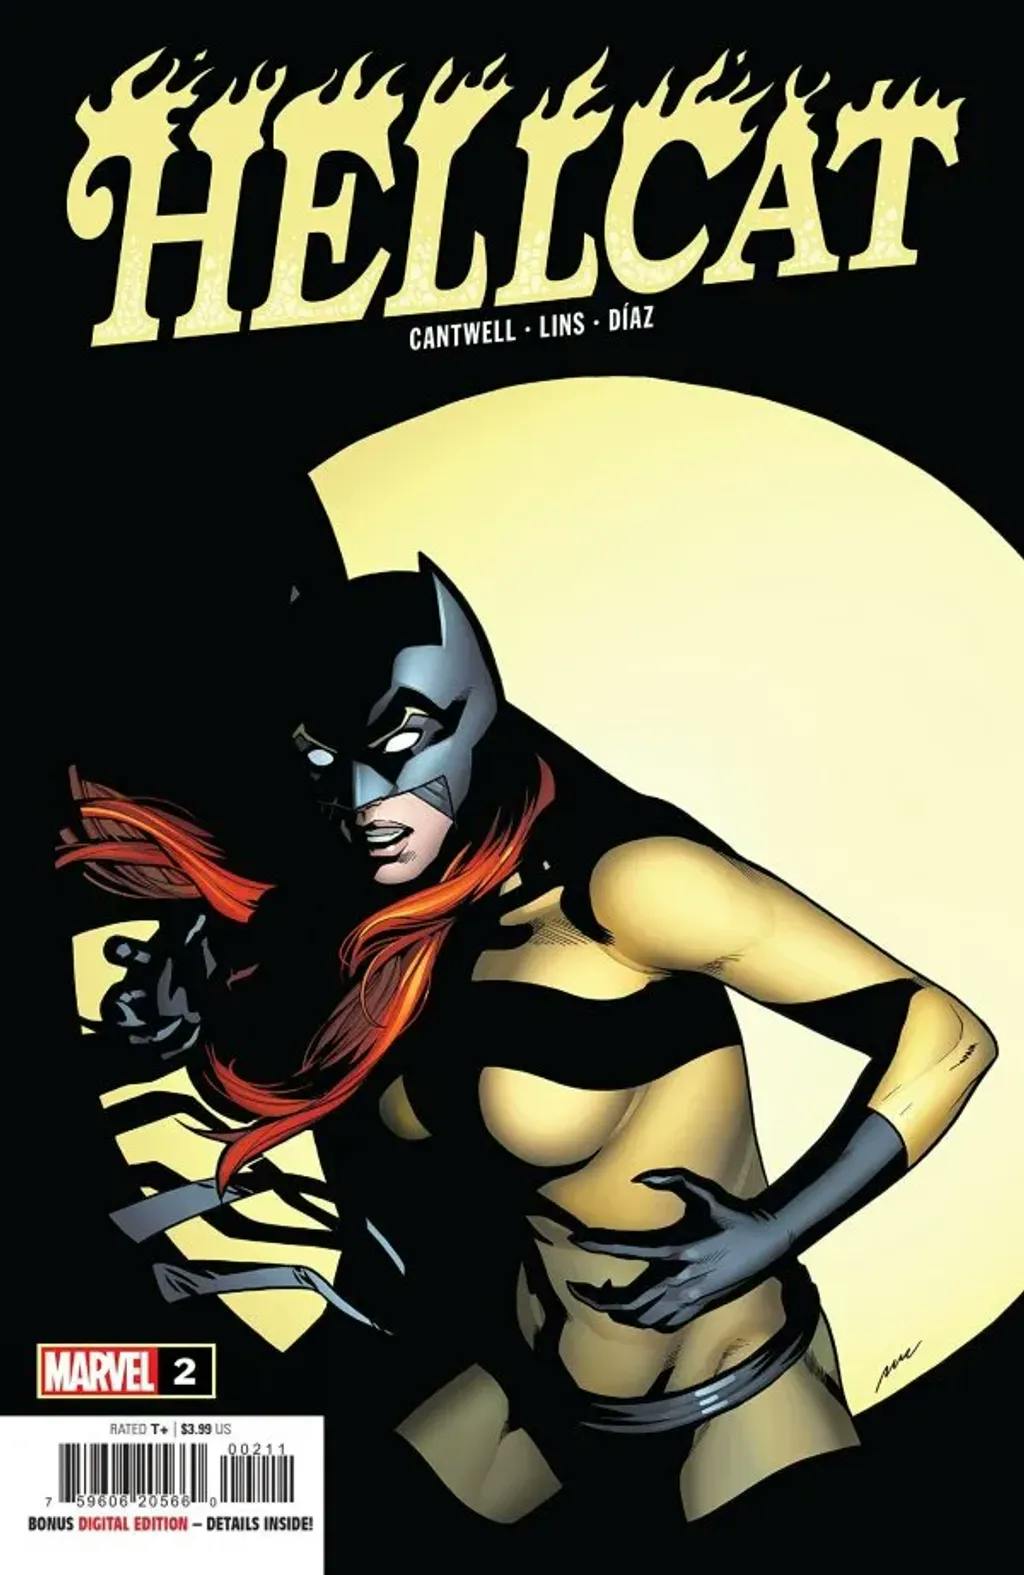 Hellcat #2 by Christopher Cantwell, Alex Lins, and Kike J. Diaz